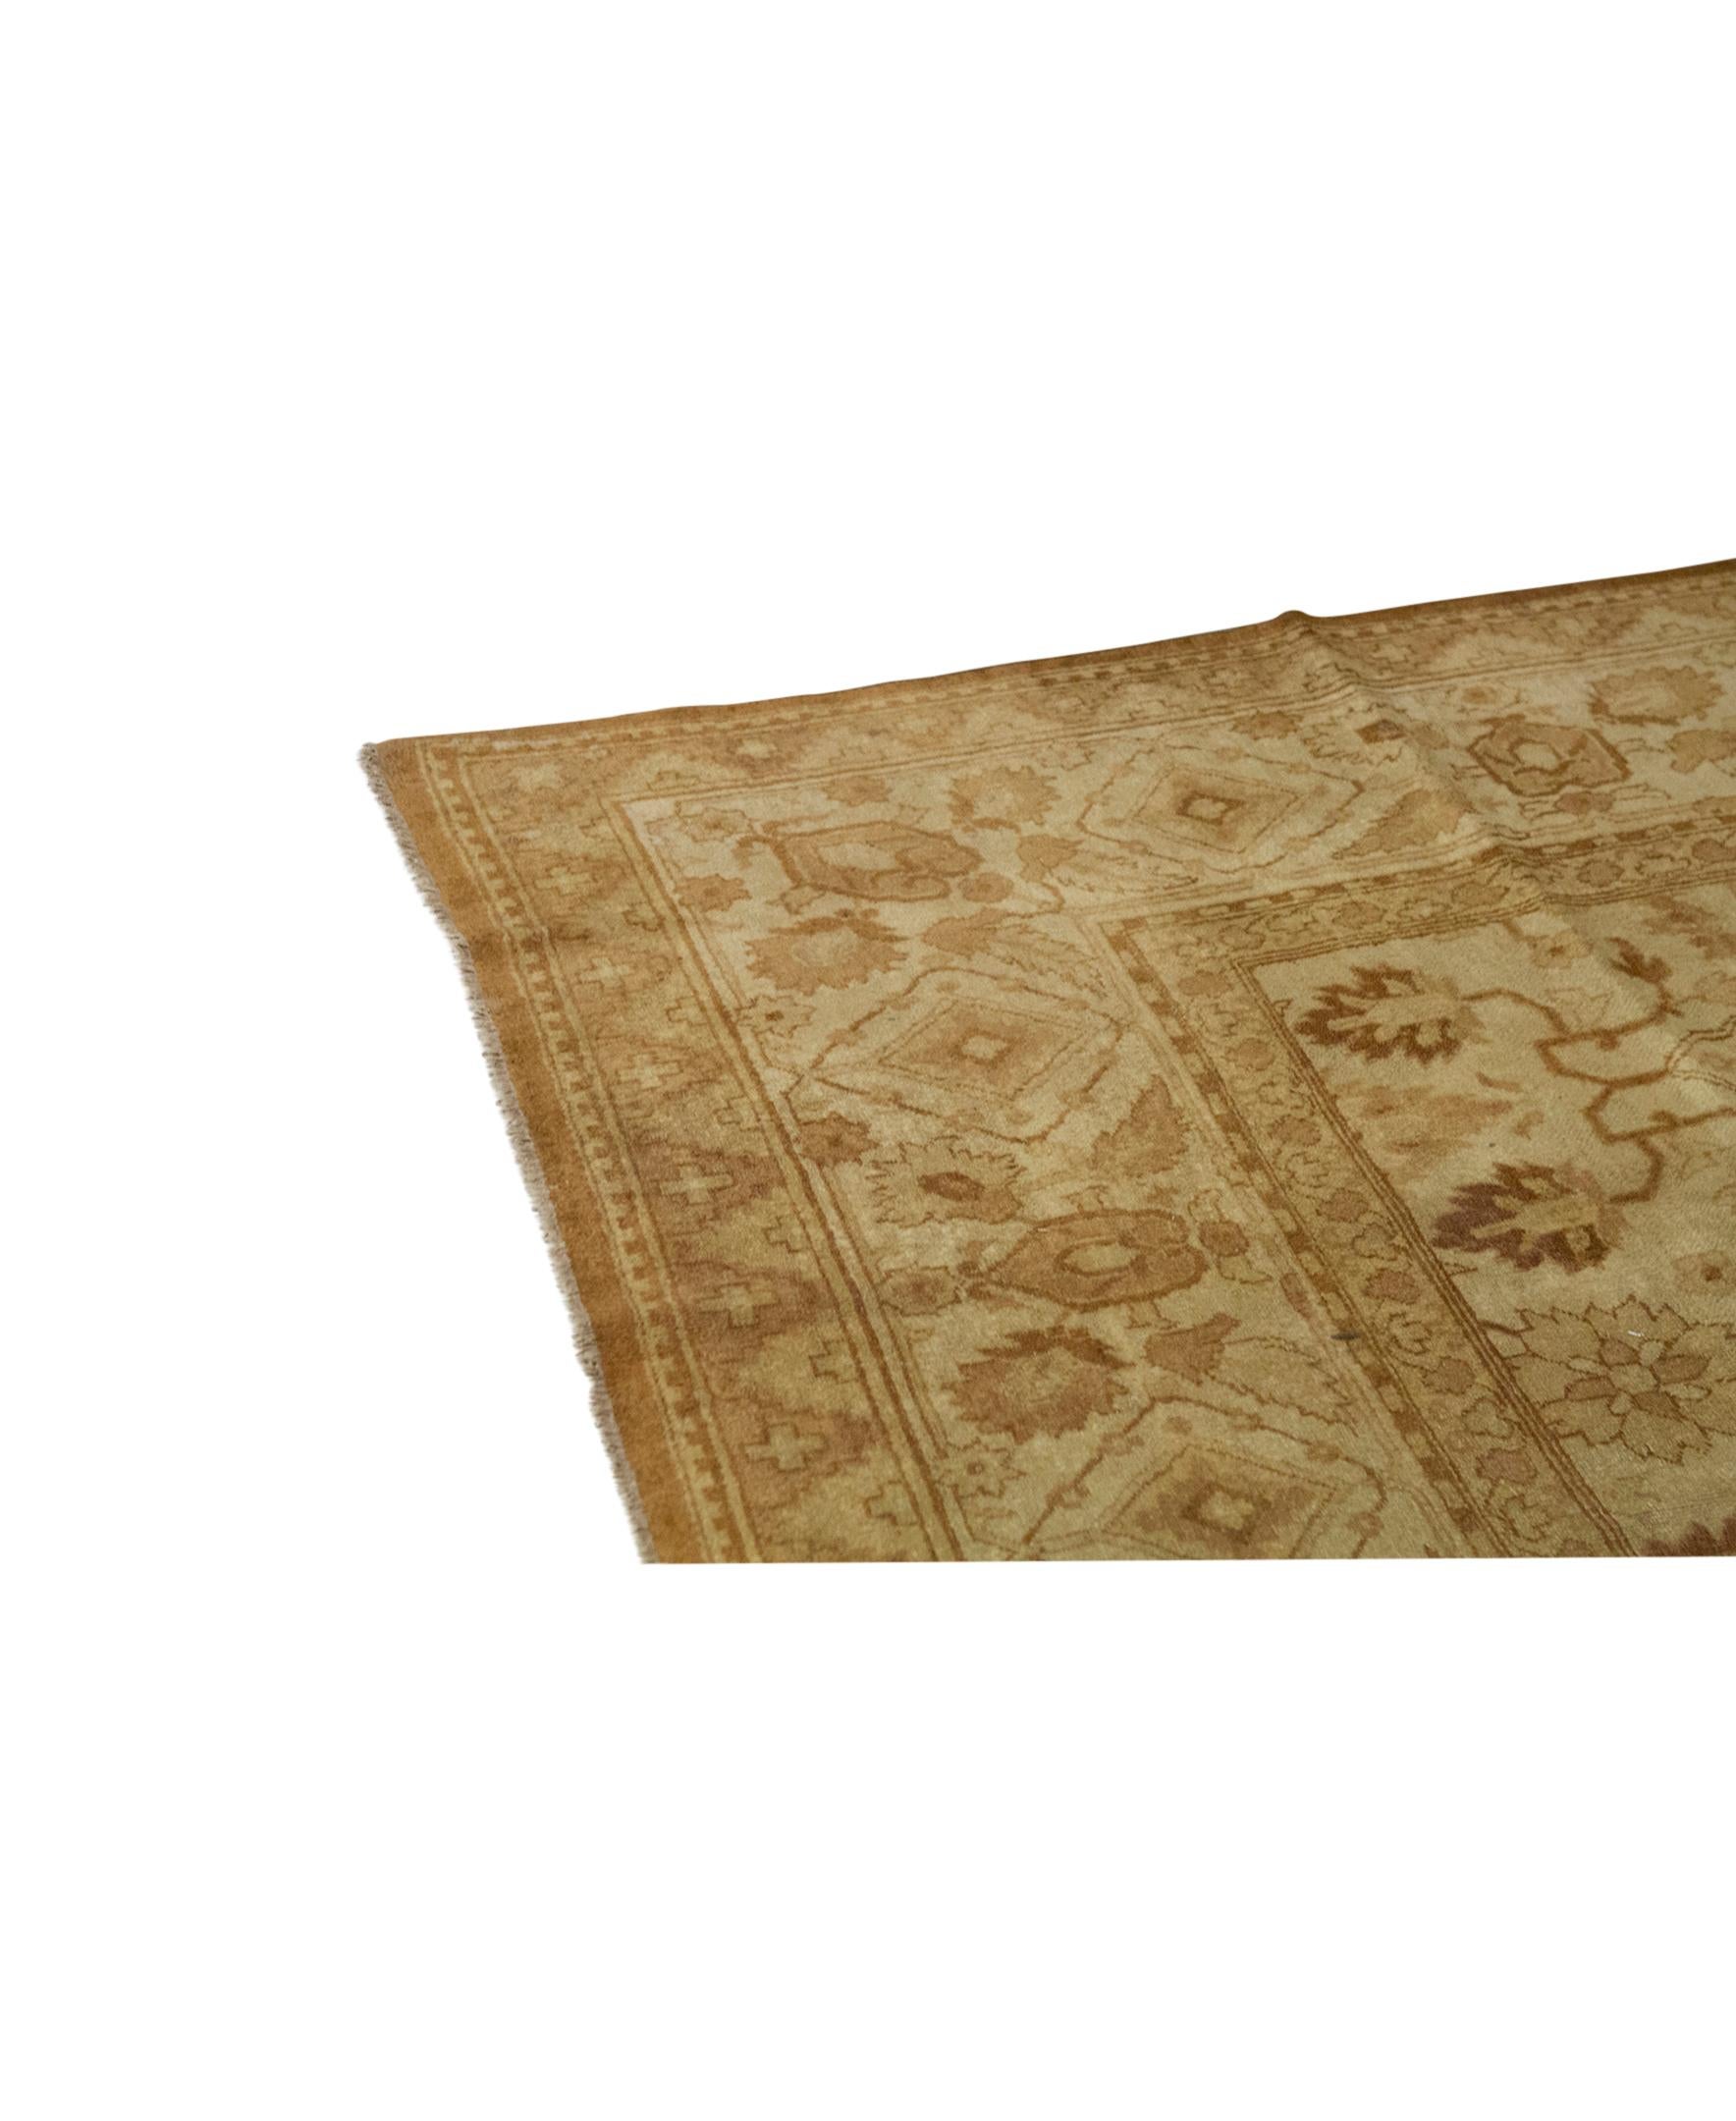   Antique Persian Fine Traditional Handwoven Luxury Wool Beige Rug. Size: 9'-9